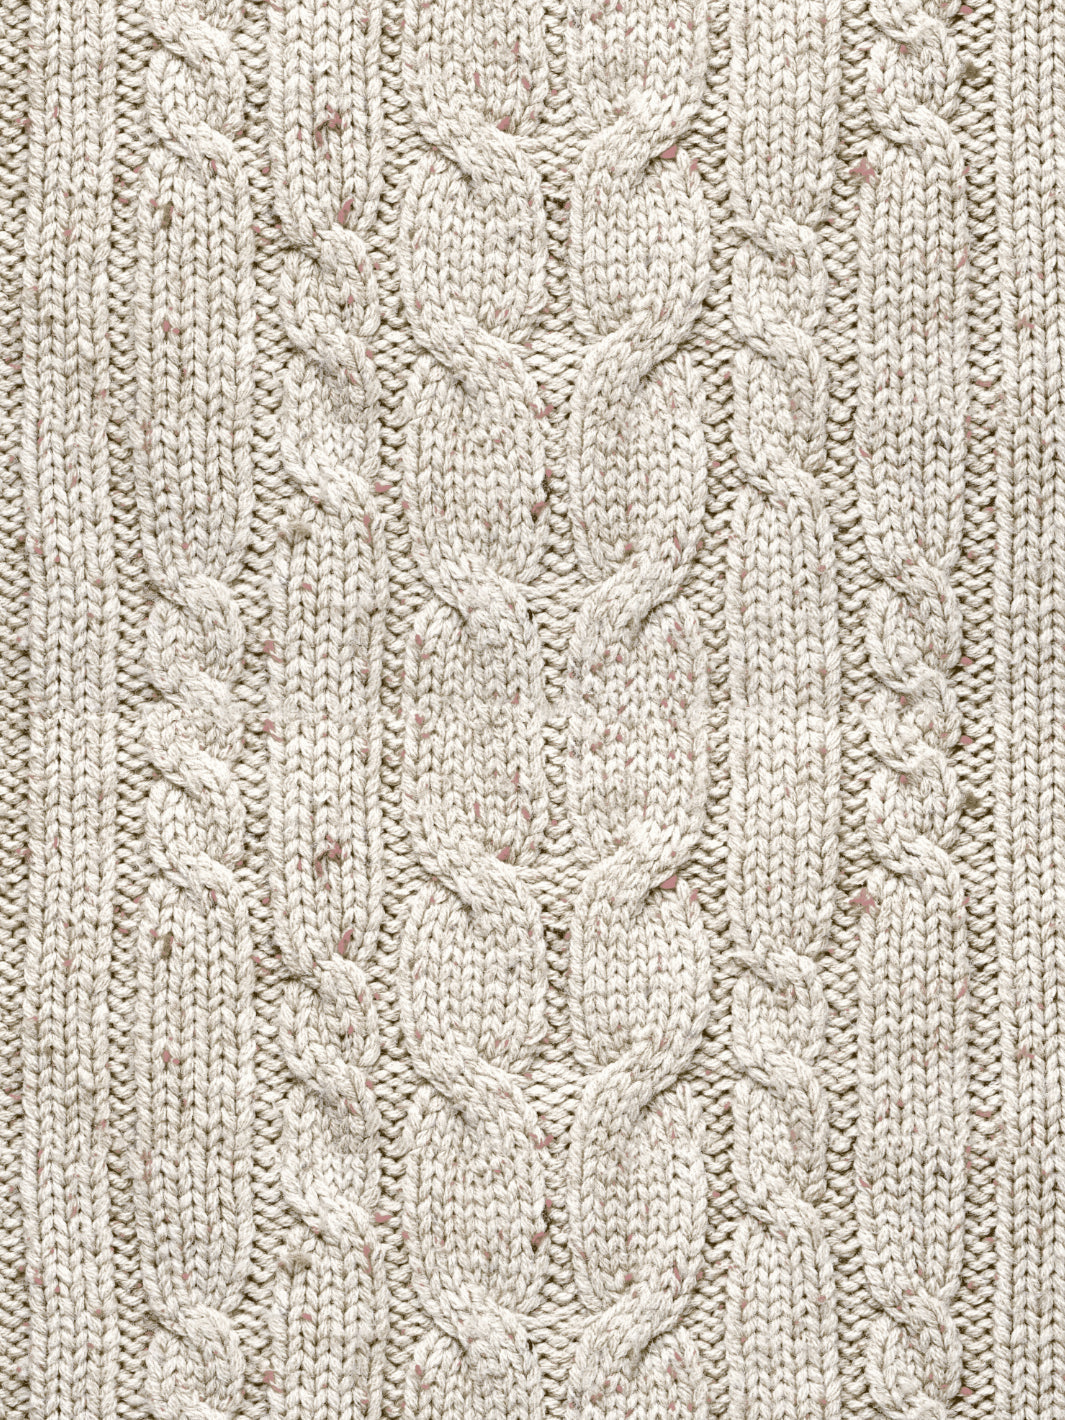 'Cable Knit' Wallpaper by Lingua Franca - Cream